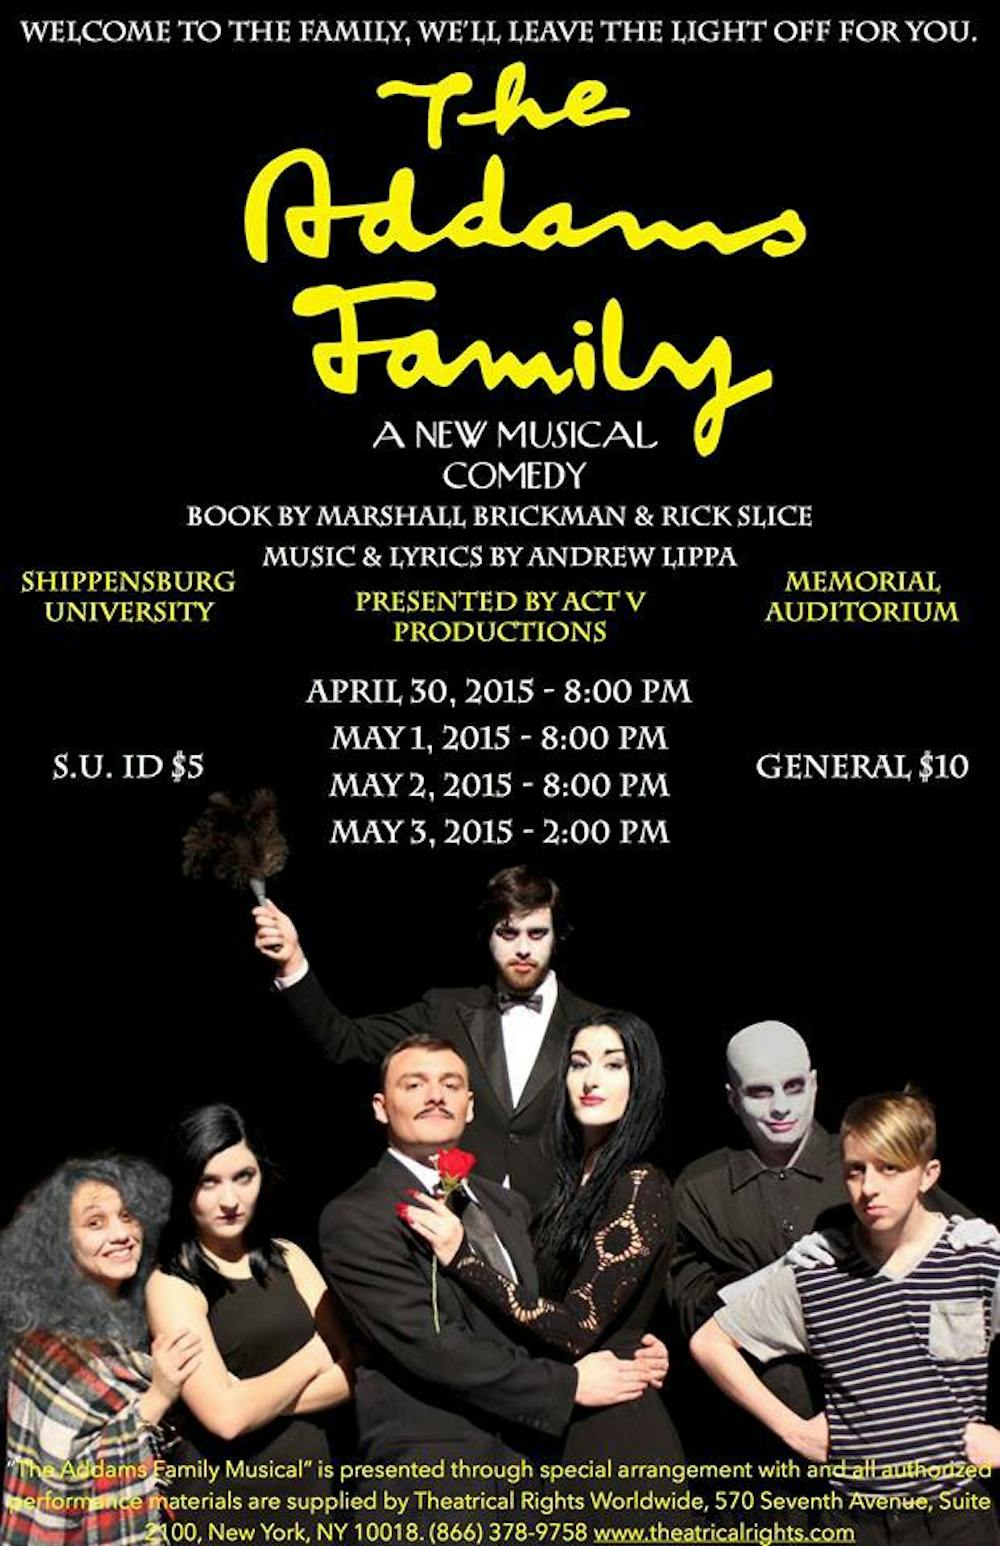 Act V presents: The Addams Family musical